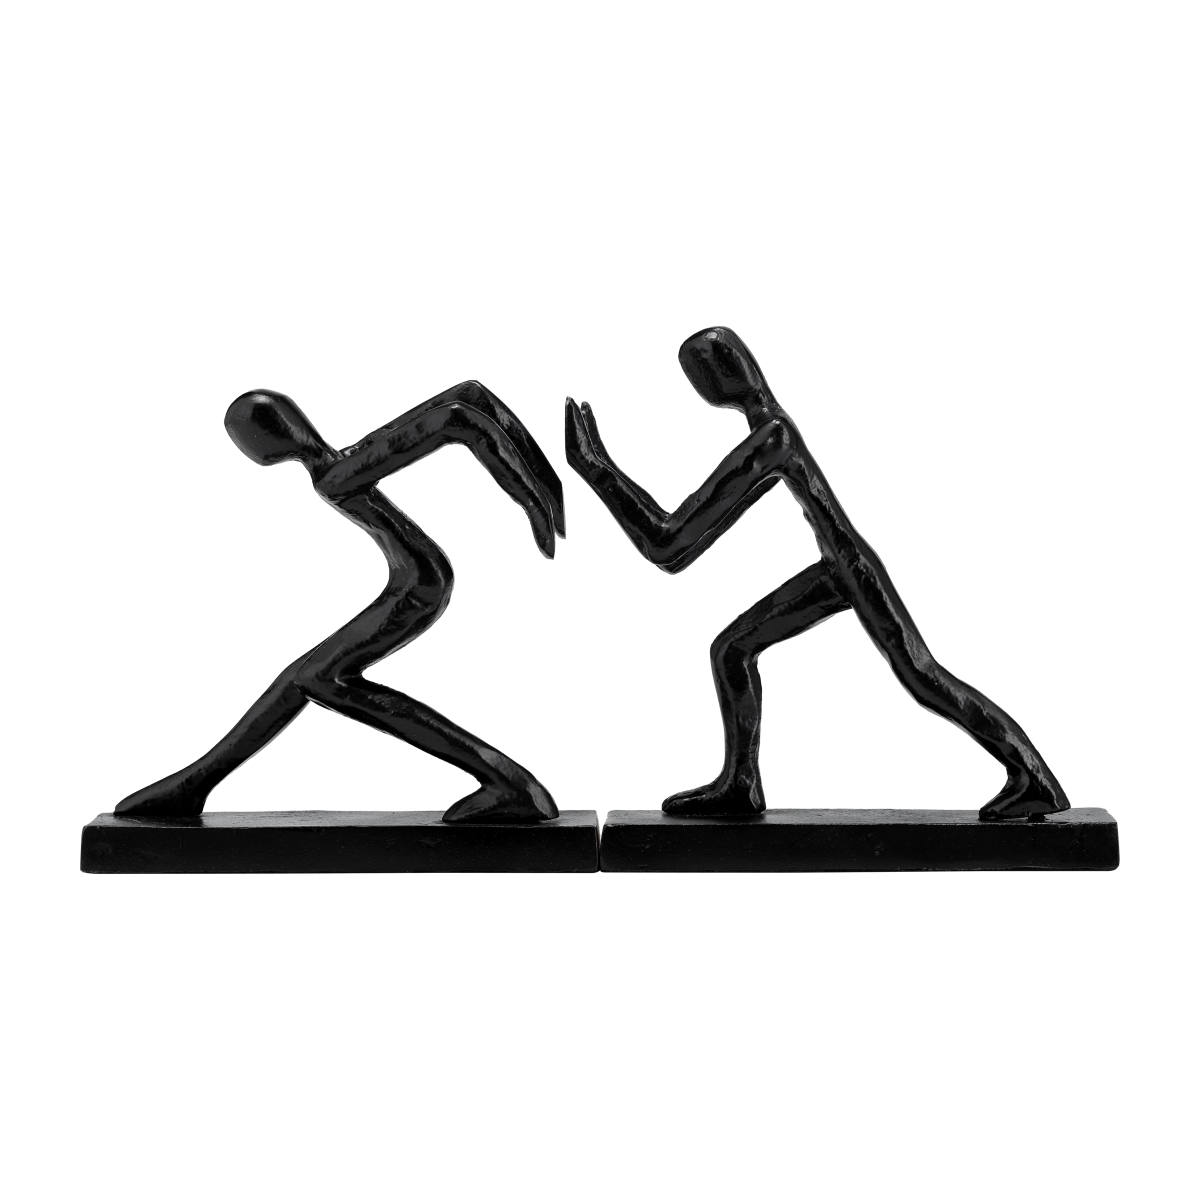 Picture of Sagebrook Home 17741 9 in. Metal Push Hold Figures Bookends, Black - Set of 2